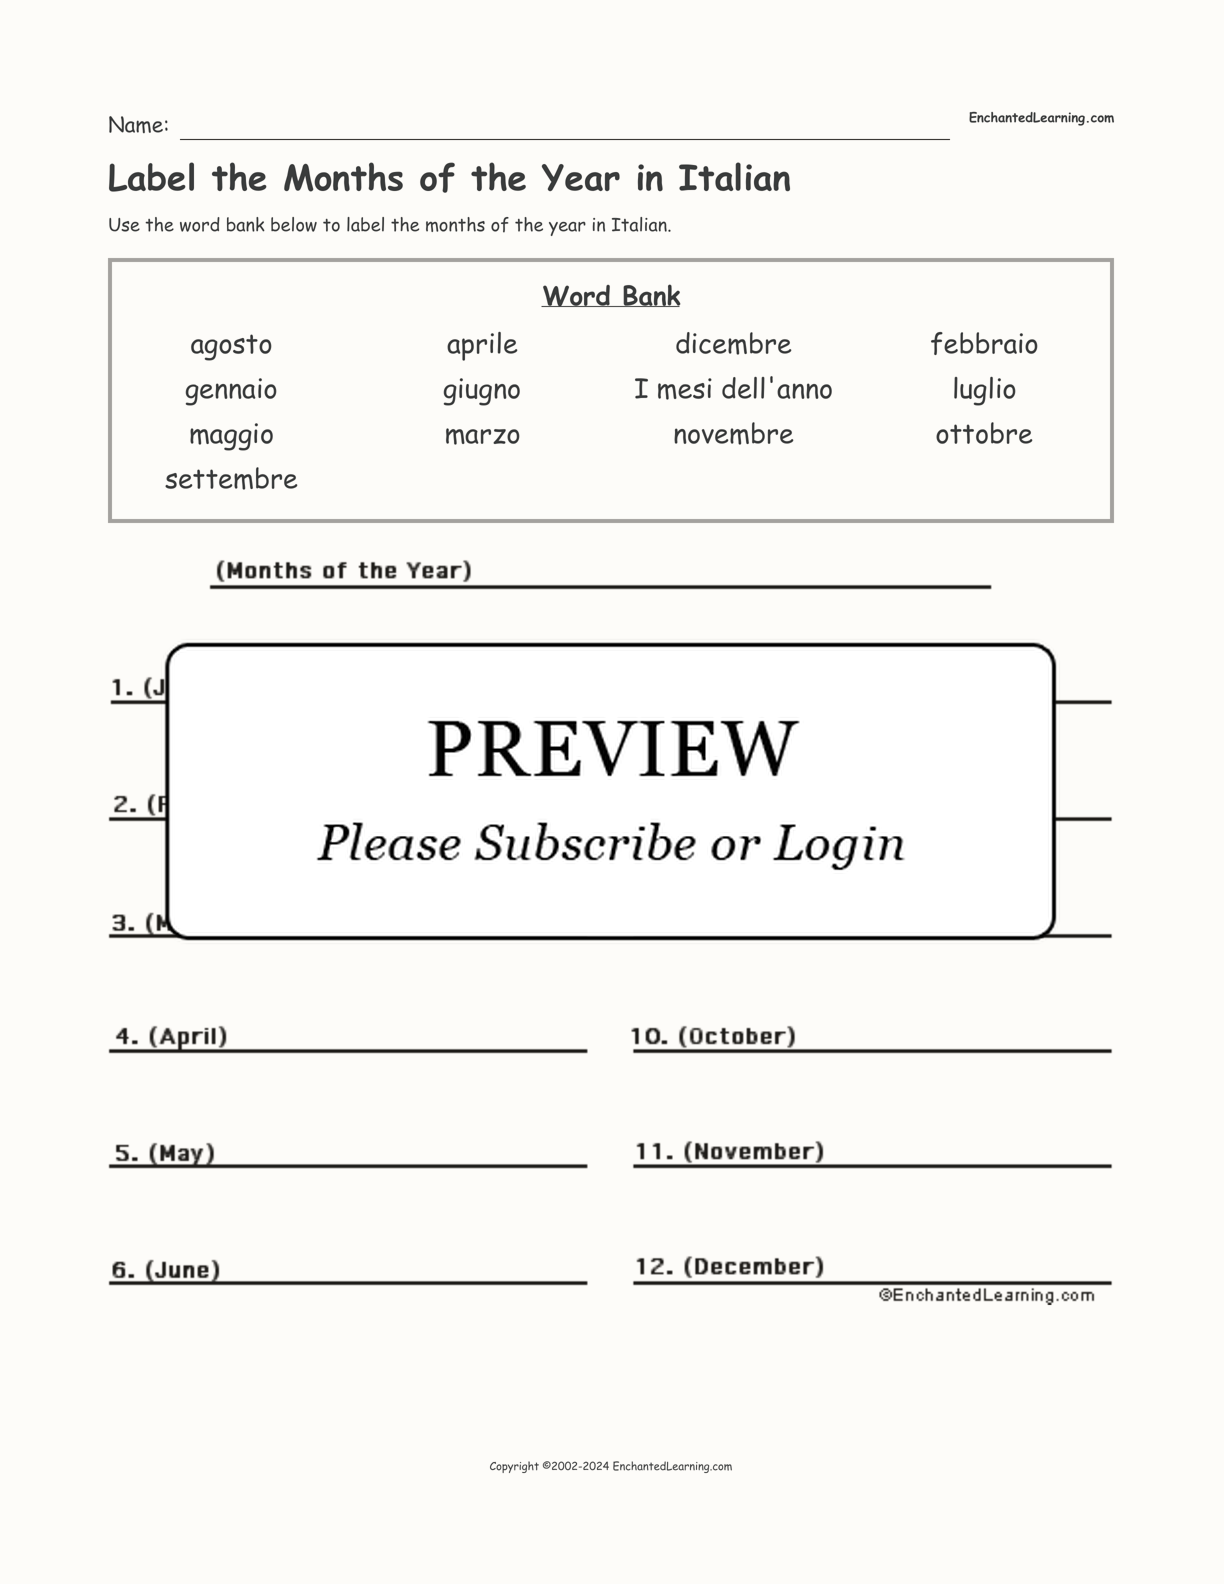 Label the Months of the Year in Italian interactive worksheet page 1